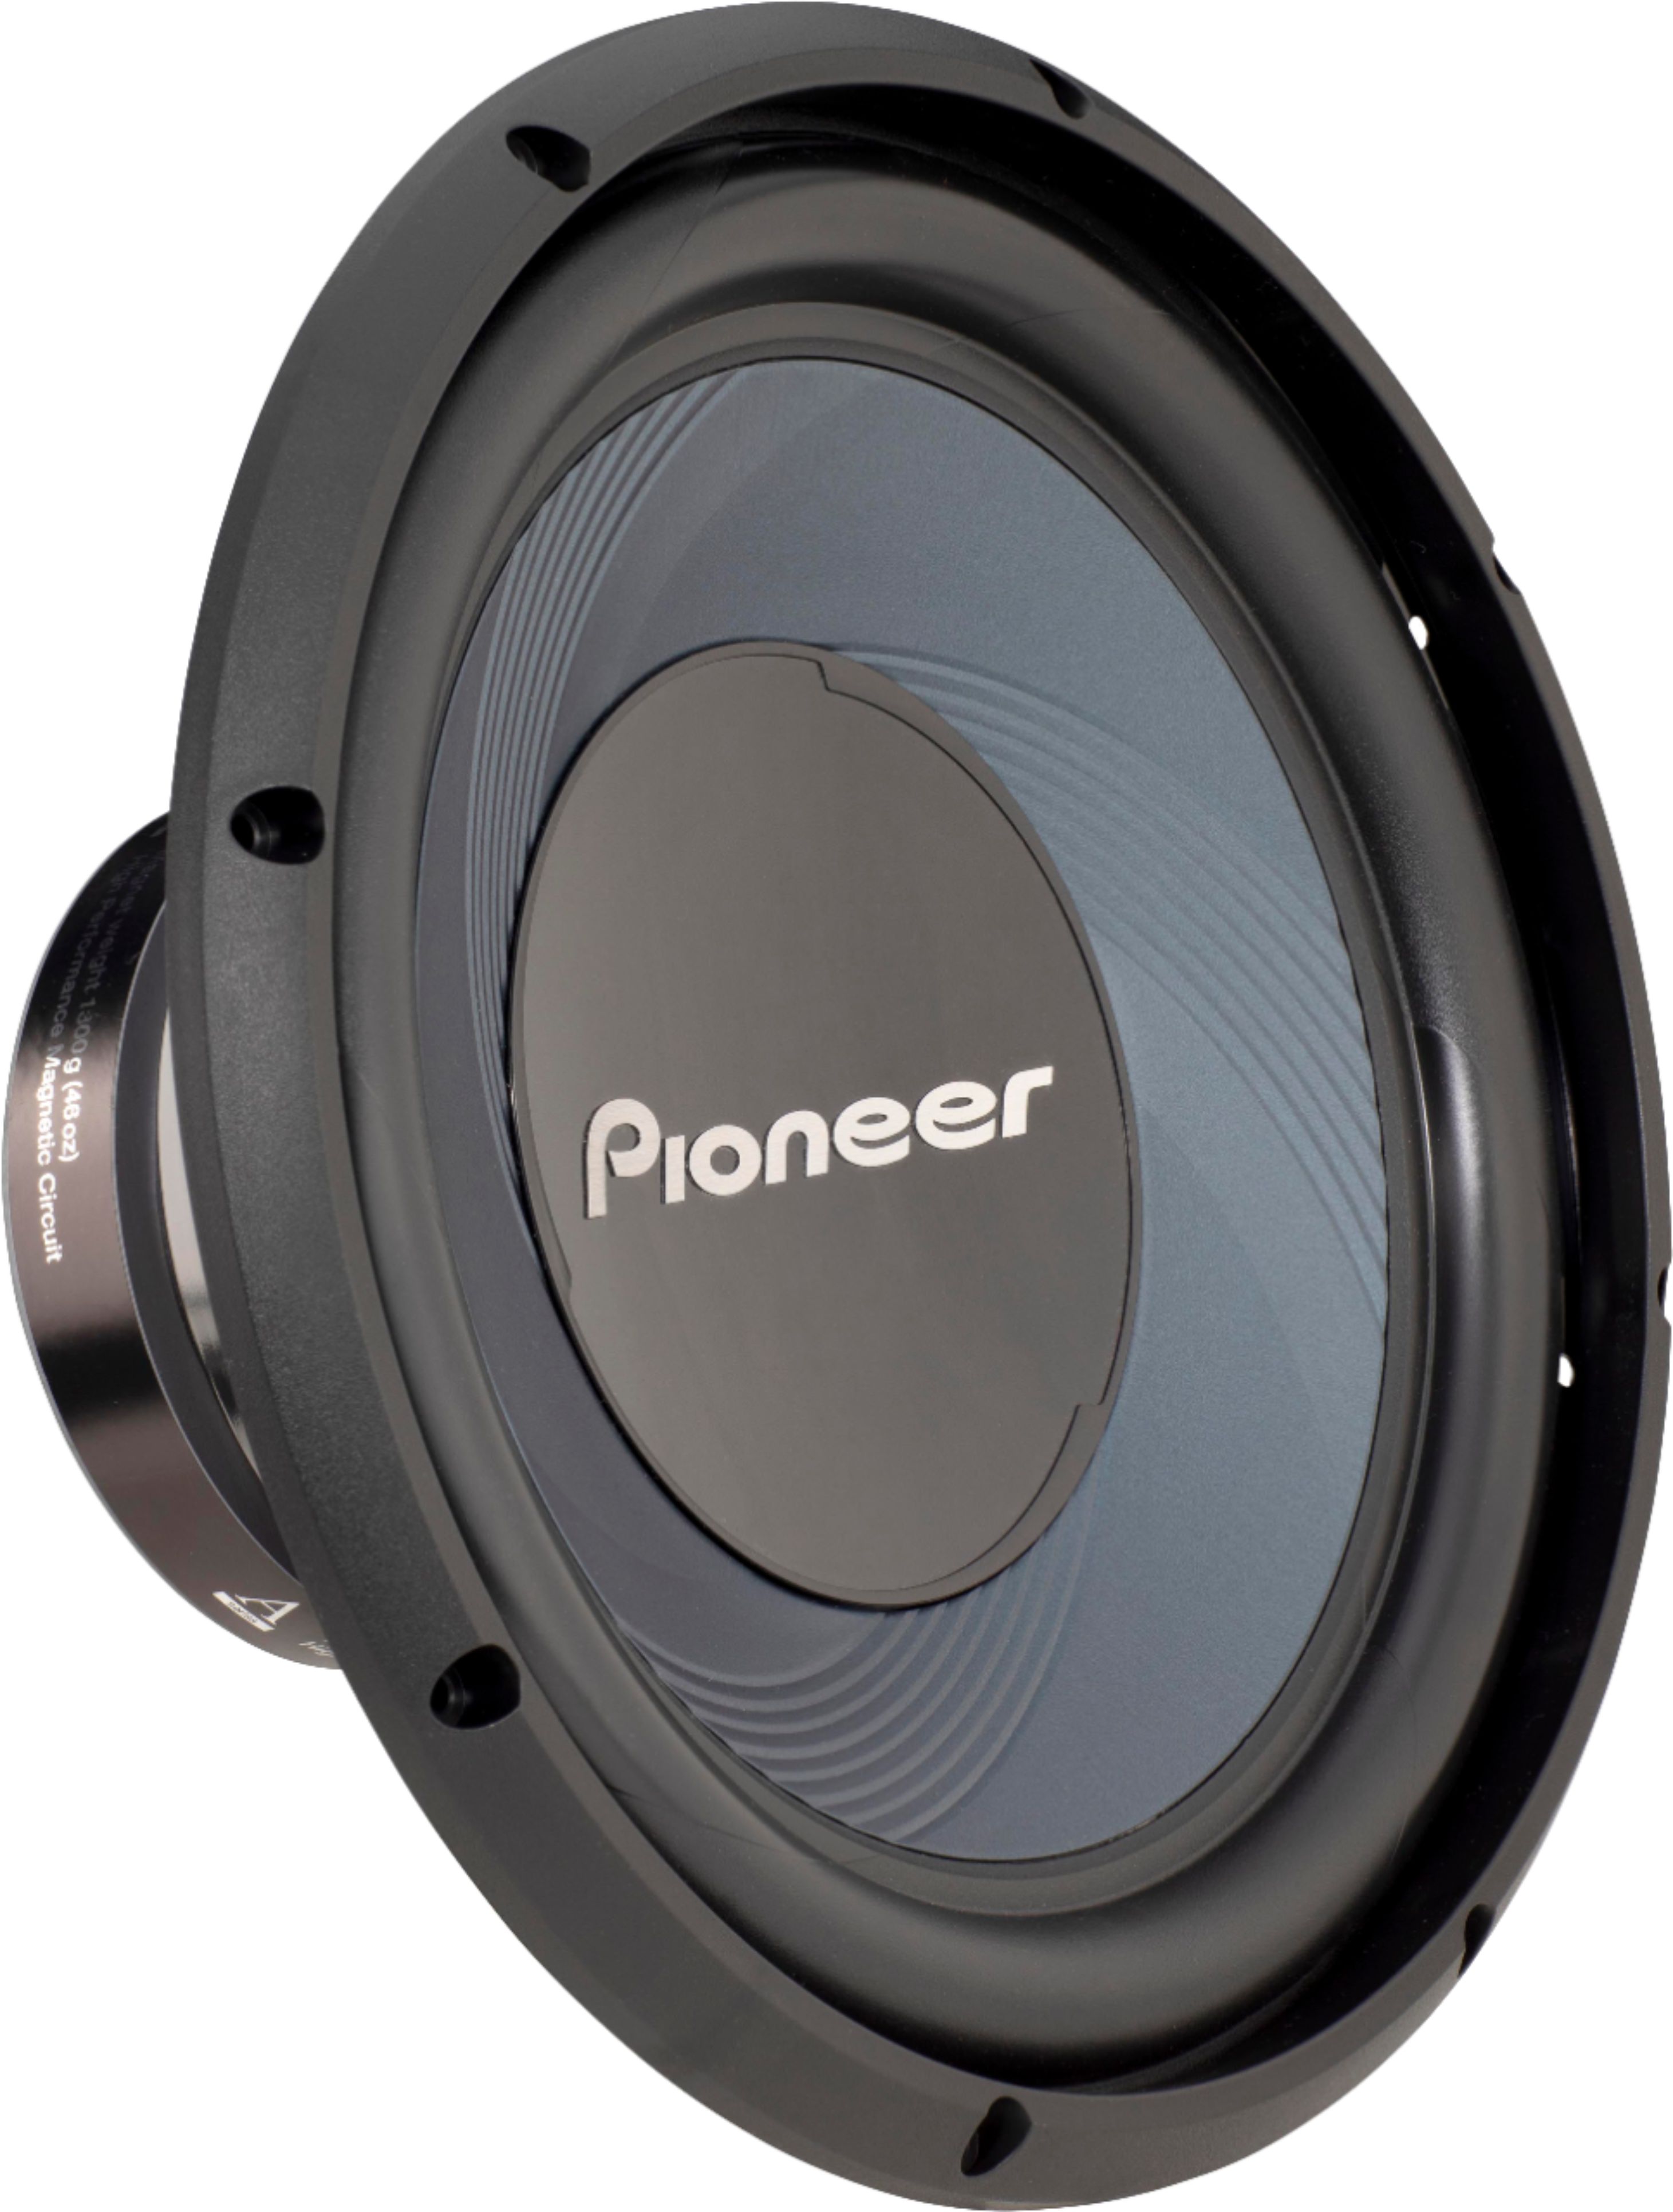 Angle View: Pioneer - 12" - 1400 W Max Power, Single 4-ohm Voice Coil, IMPP™ cone, Rubber Surround - Component Subwoofer - BLUE